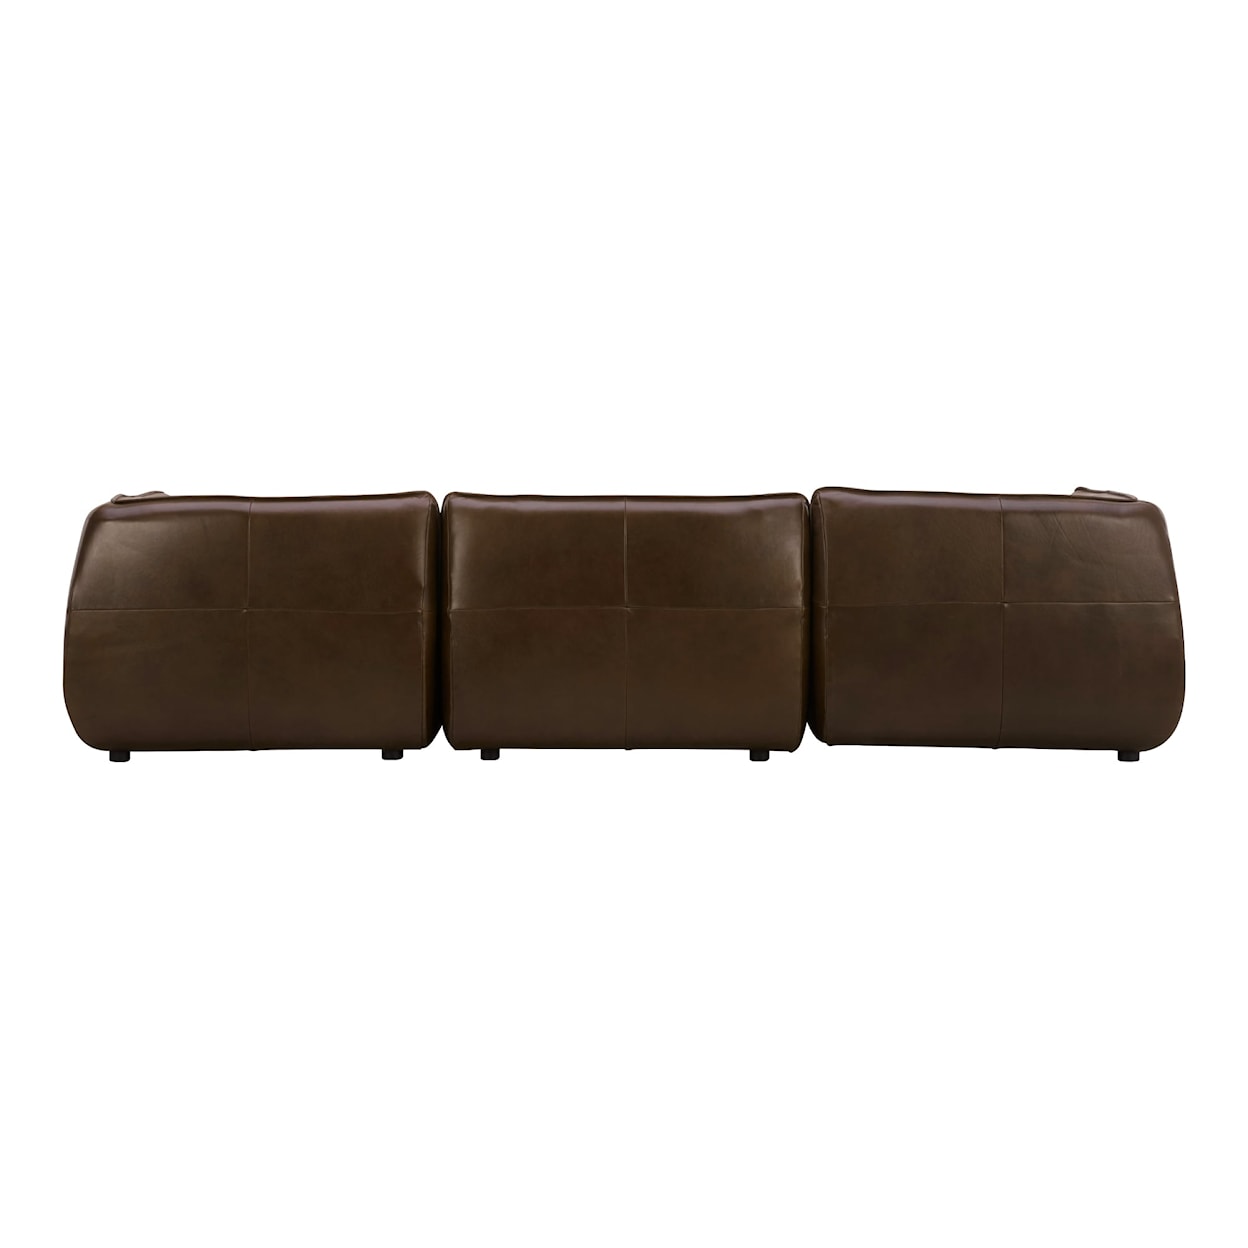 Moe's Home Collection Zeppelin Sectional Sofa